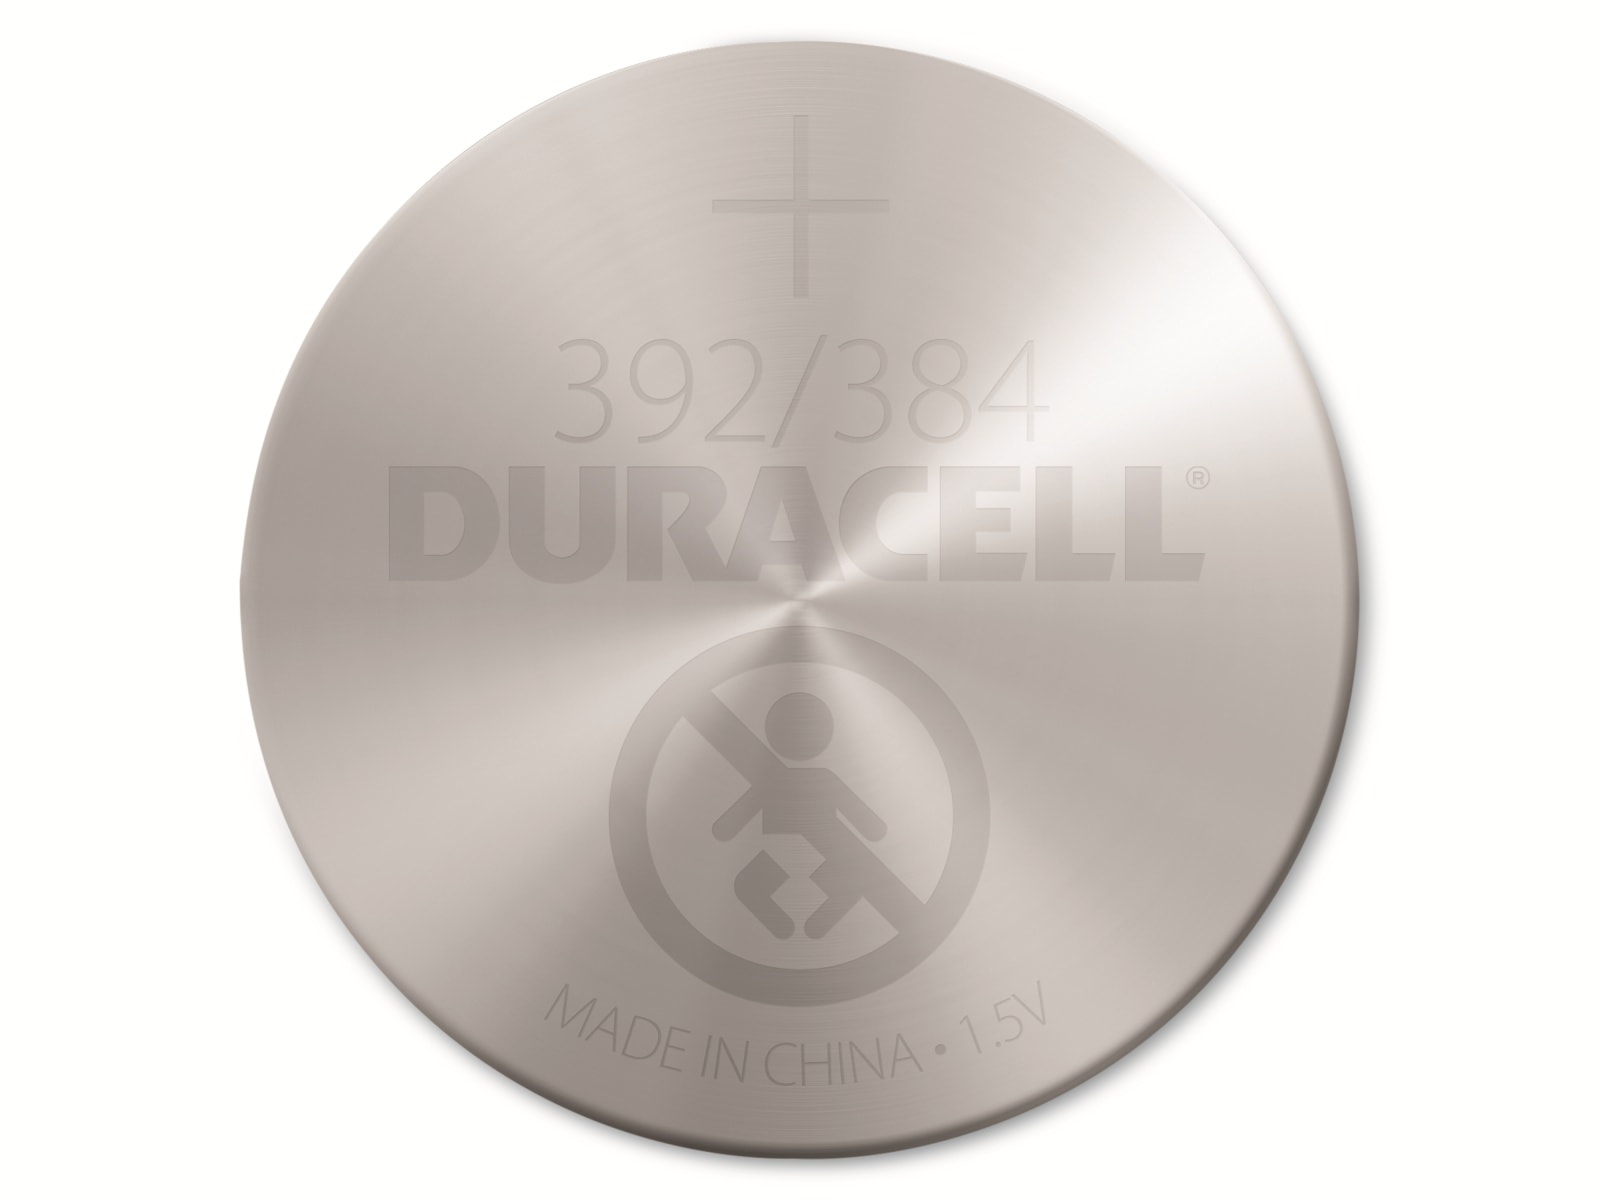 DURACELL Silver Oxide-Knopfzelle SR41, 1.5V, Watch